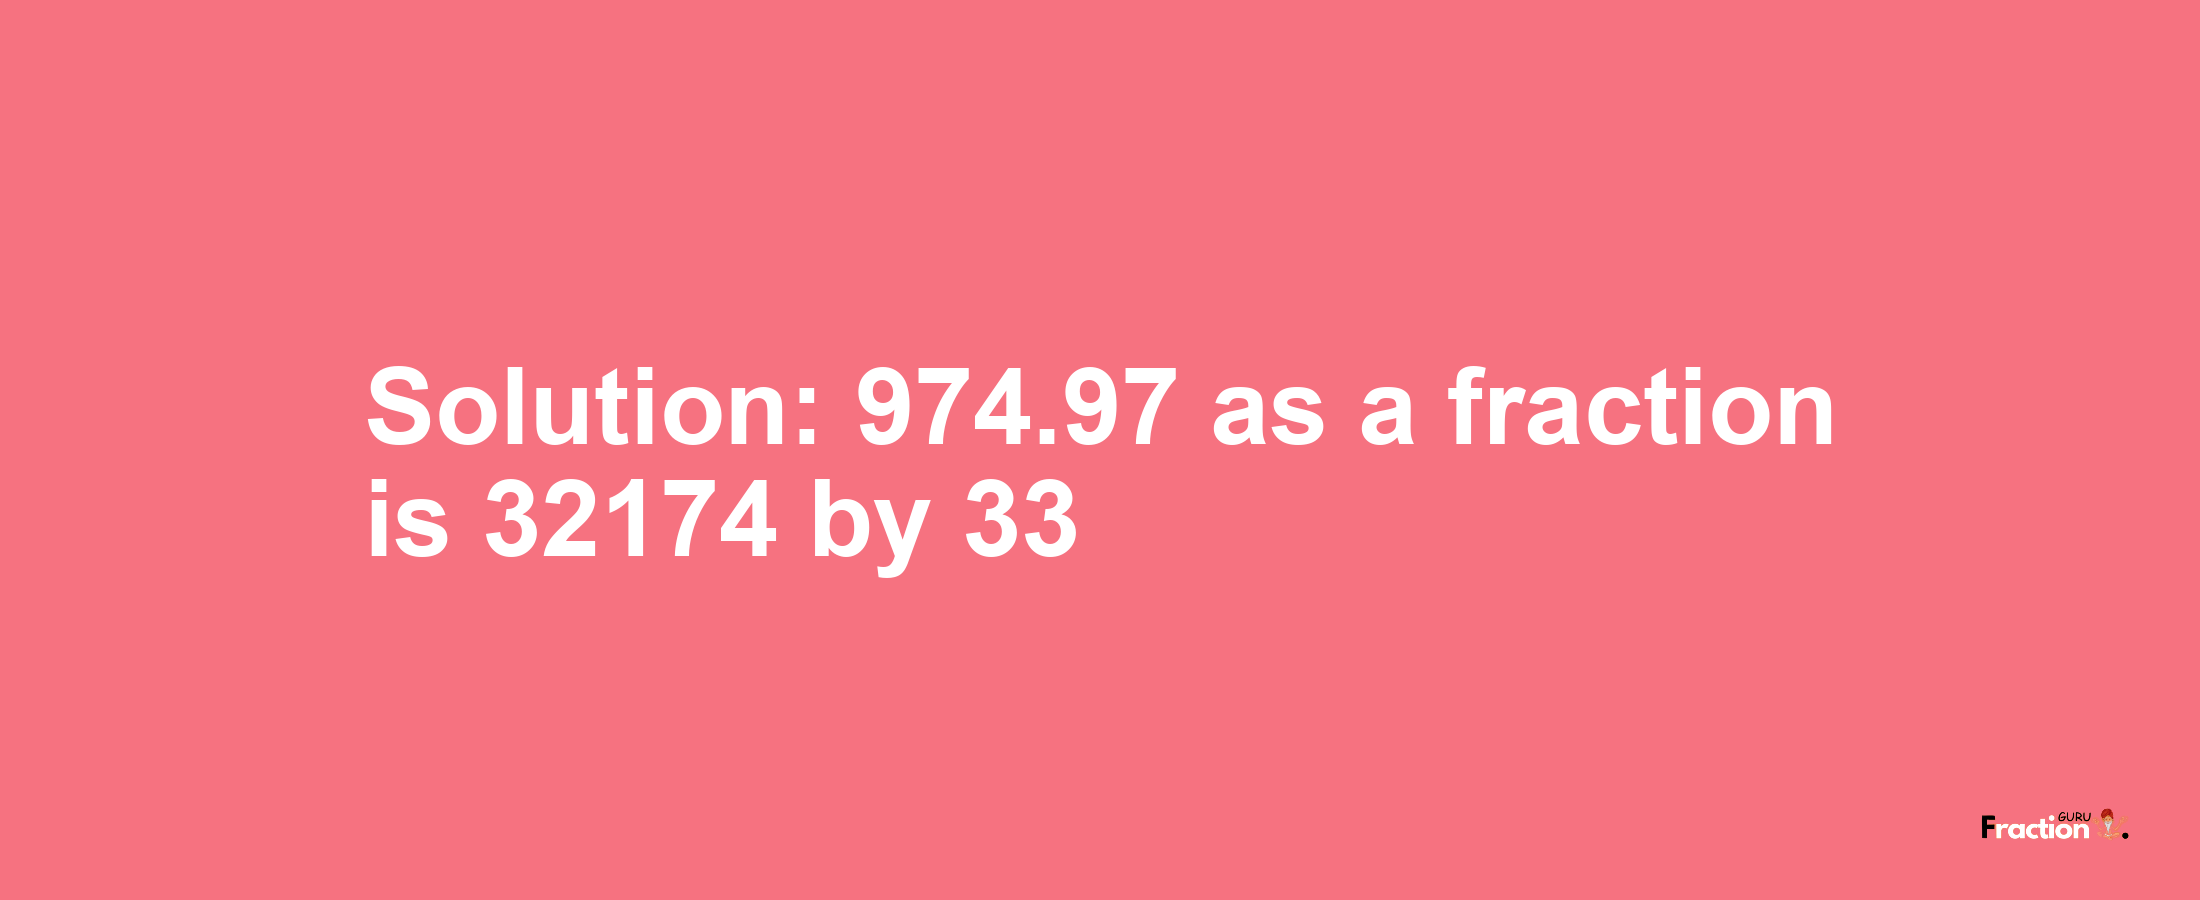 Solution:974.97 as a fraction is 32174/33